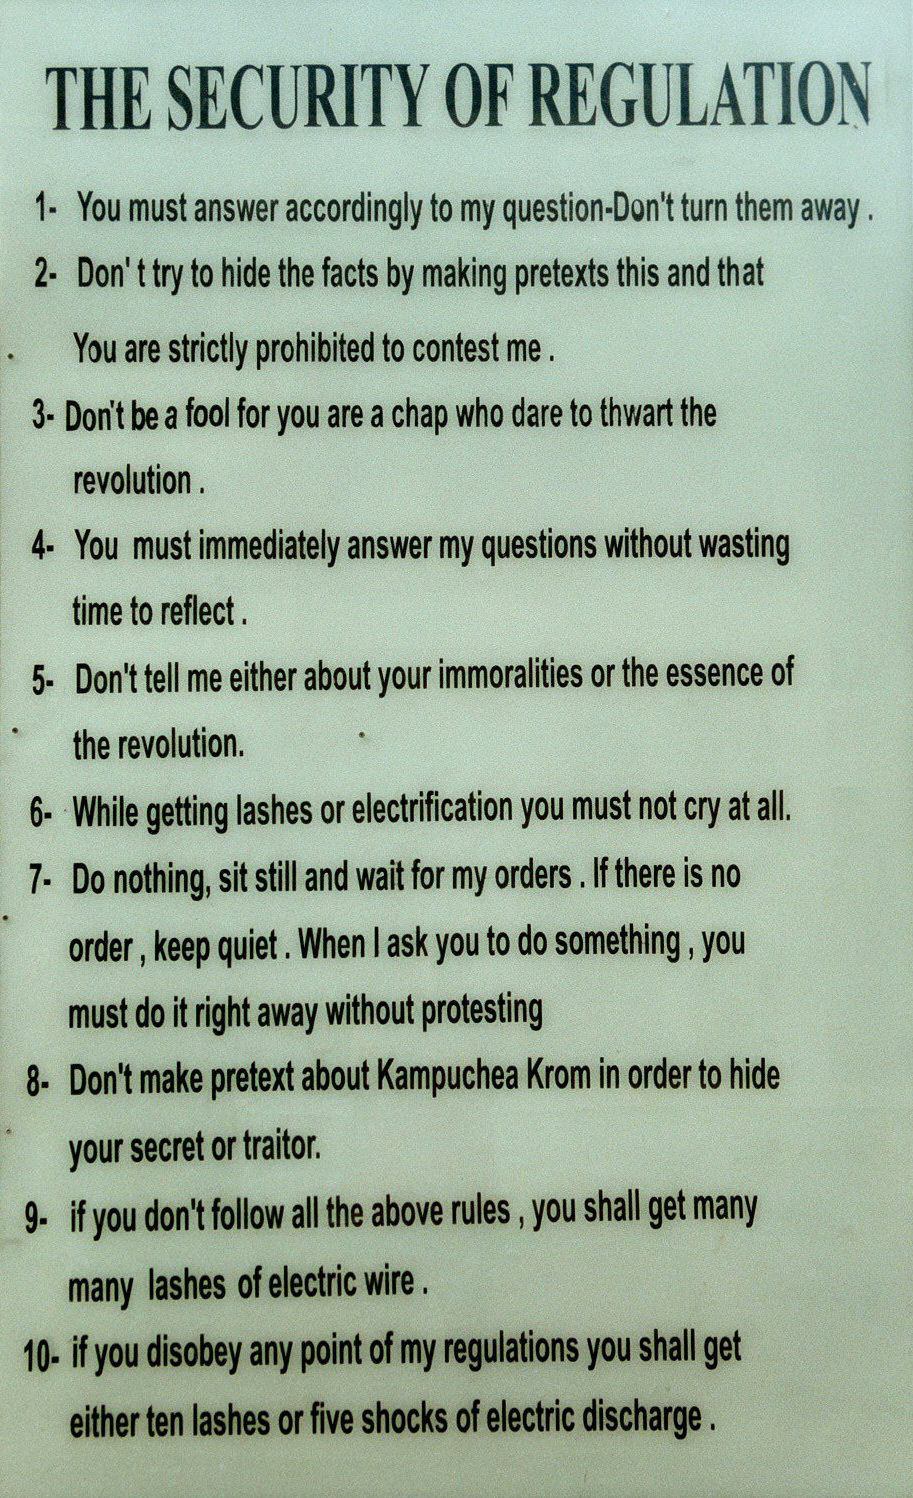 s21 prison 10 rules sign - Cambodia 2003 - The security of regulation -  You must answer accordingly to my question Don't turn them away.